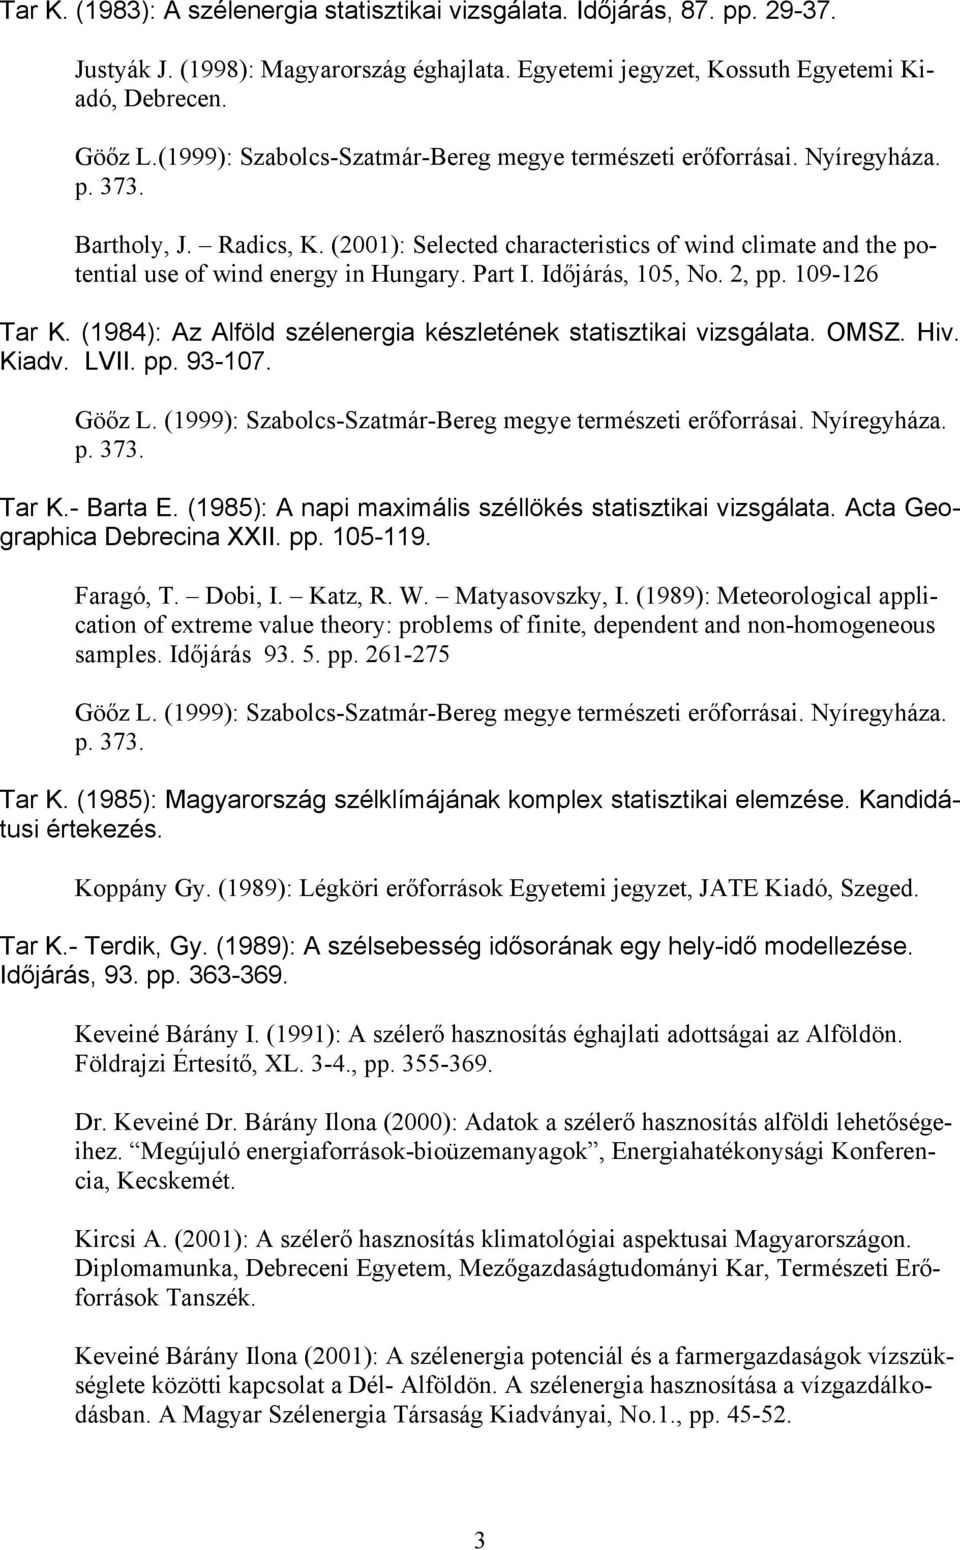 (2001): Selected characteristics of wind climate and the potential use of wind energy in Hungary. Part I. Időjárás, 105, No. 2, pp. 109-126 Tar K.